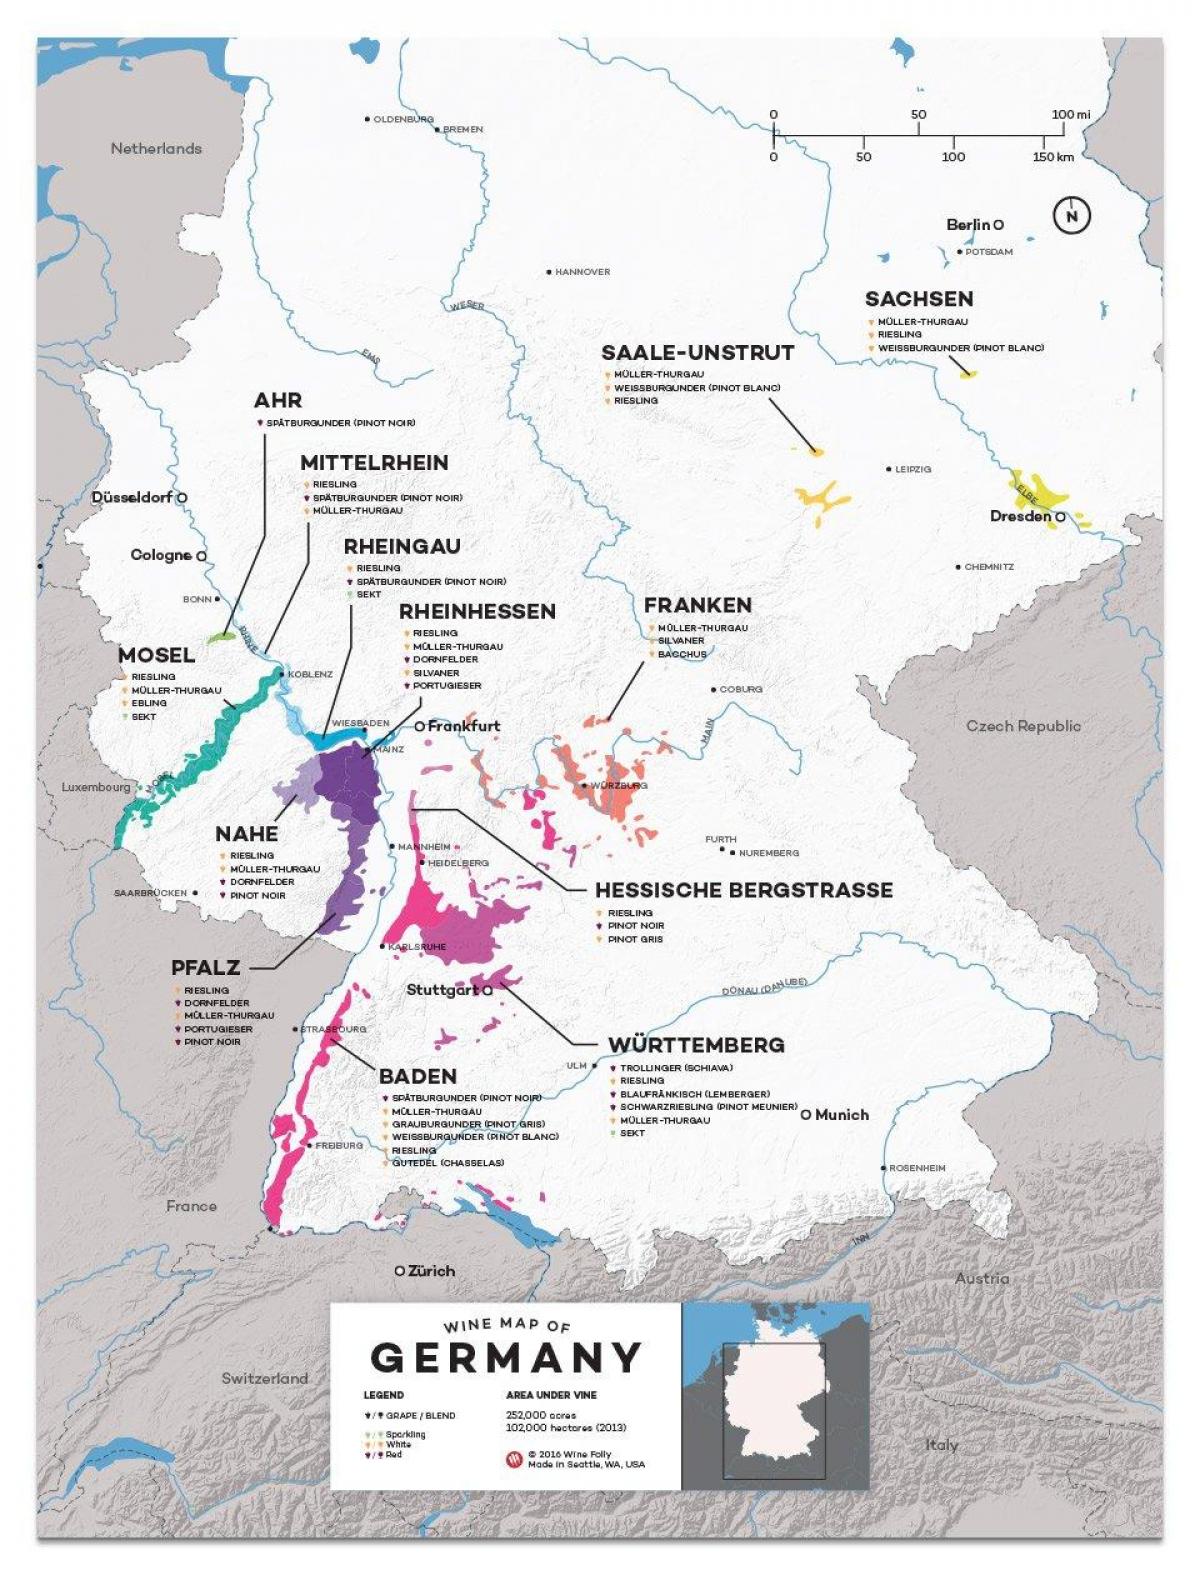 map of Germany wine